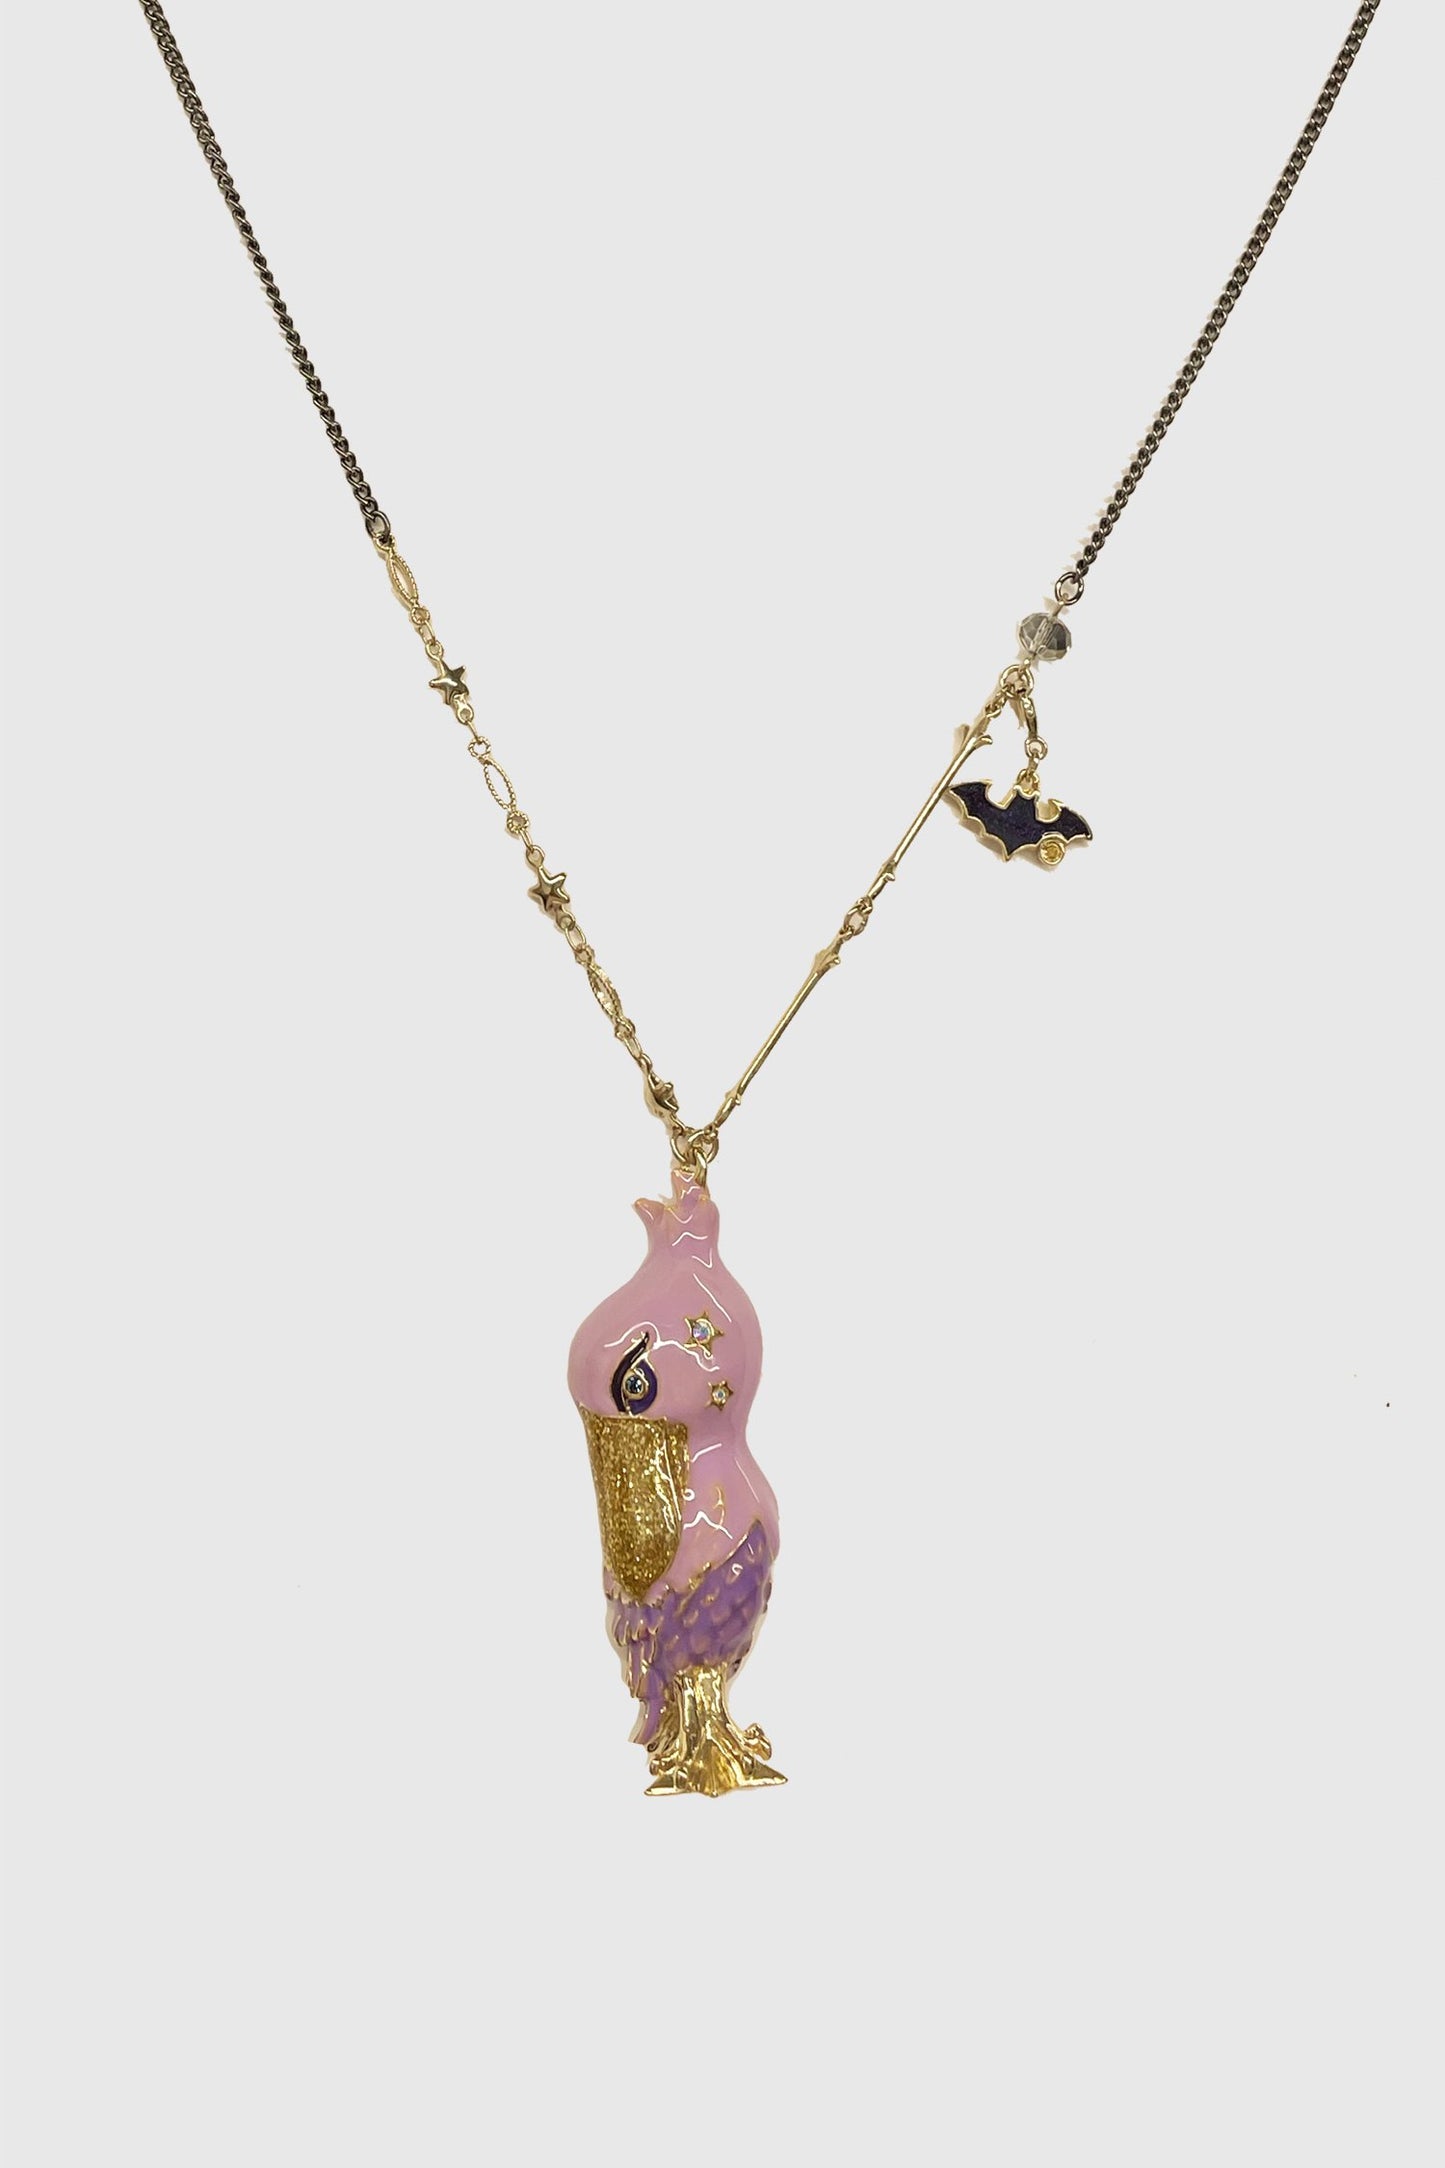 Necklace, Pelican pink on top purple bottom, golden highlights, gems and a bat on a golden chain